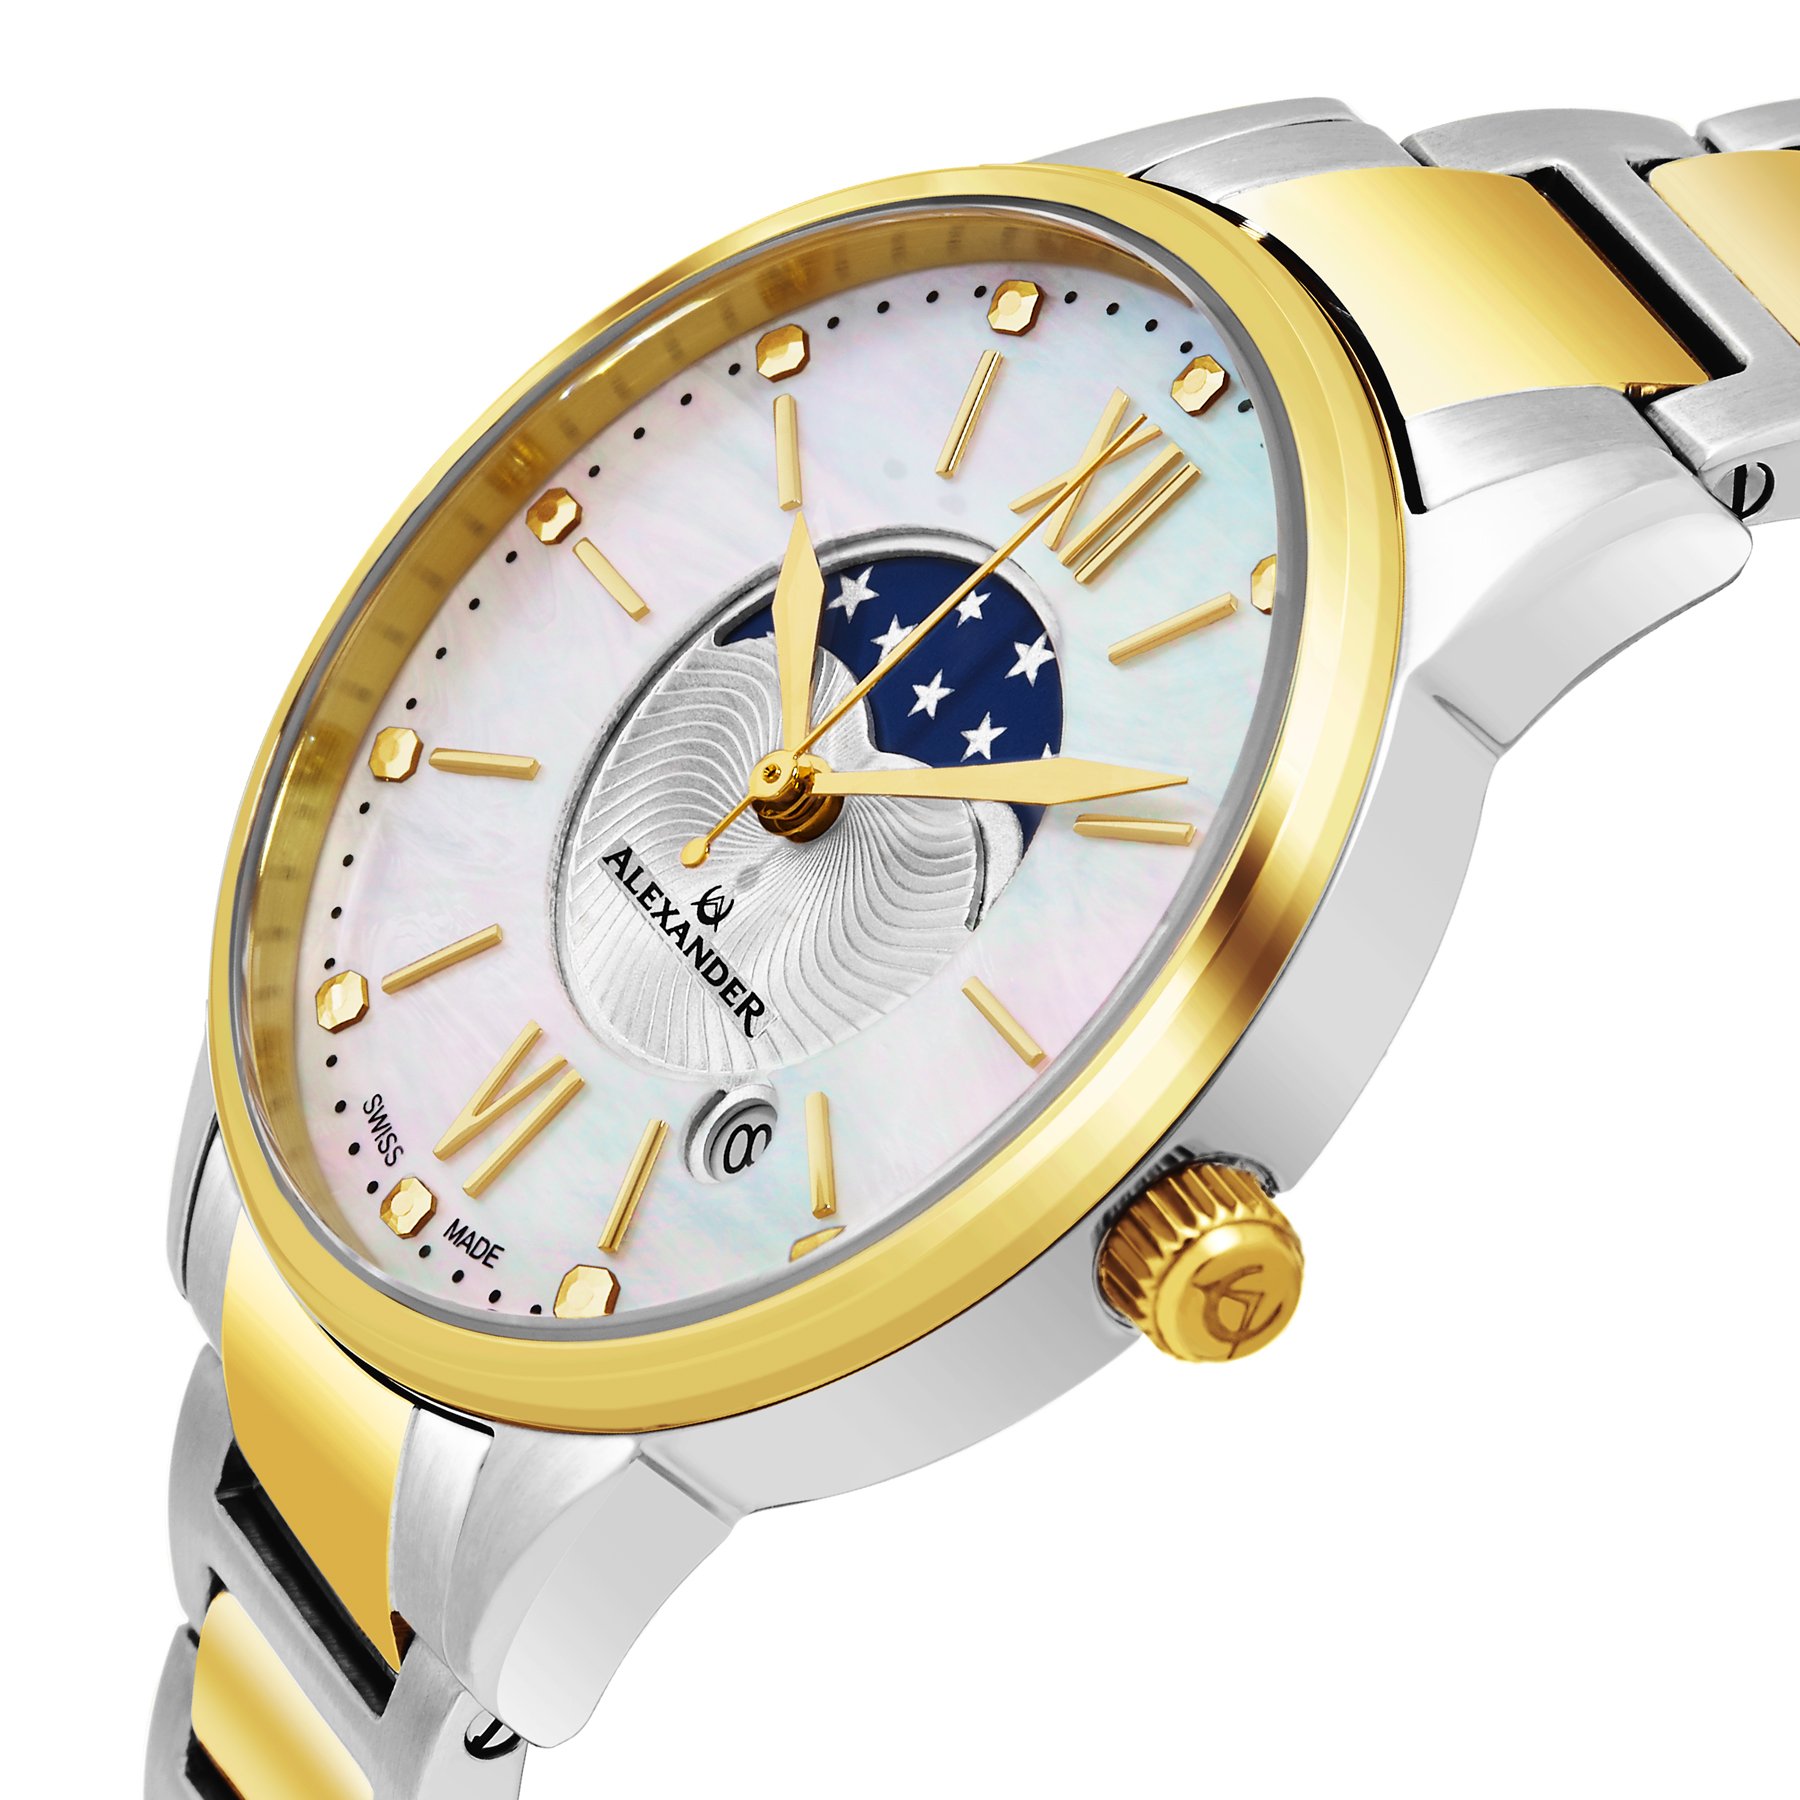 Alexander Monarch Vassilis Moon Phase Date White Mother of Pearl 35 MM Face Stainless Steel Yellow Gold Watch for Women - Swiss Quartz Elegant Two Tone Ladies Fashion Designer Dress Watch A204B-04